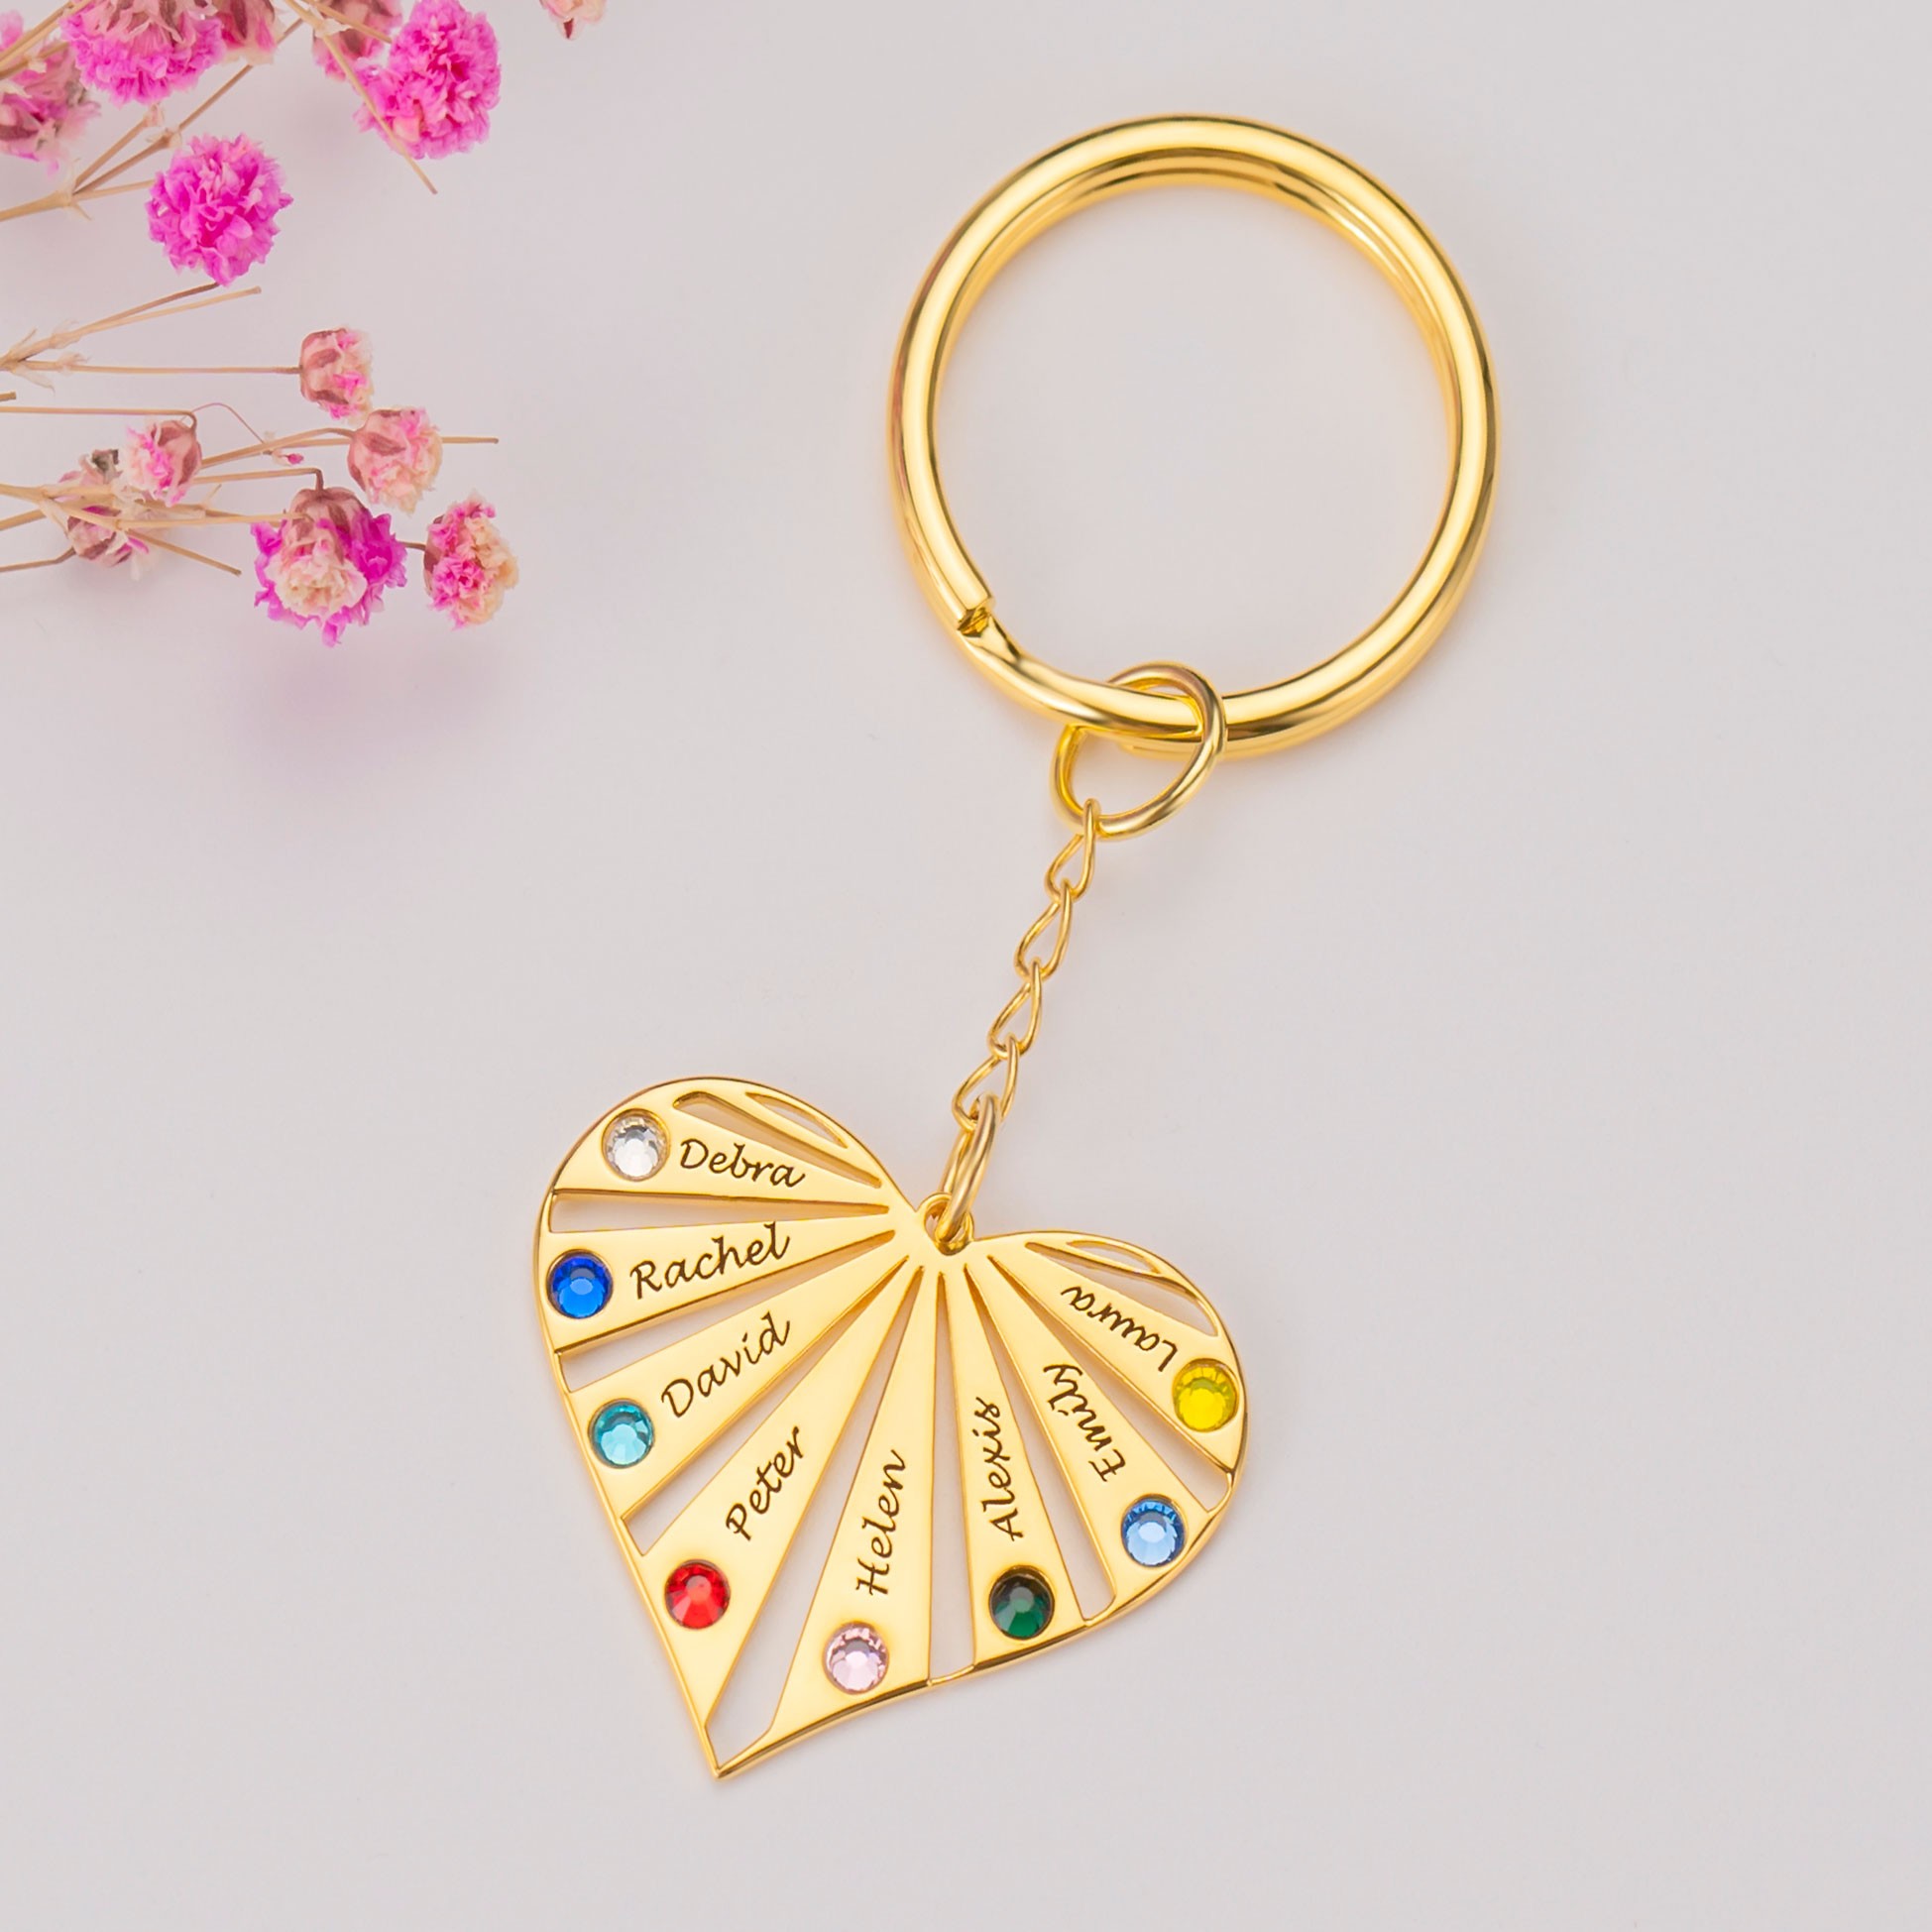 18K Gold Plating Personalized 1-8 Engraving Names with Birthstone Key Chain Gift